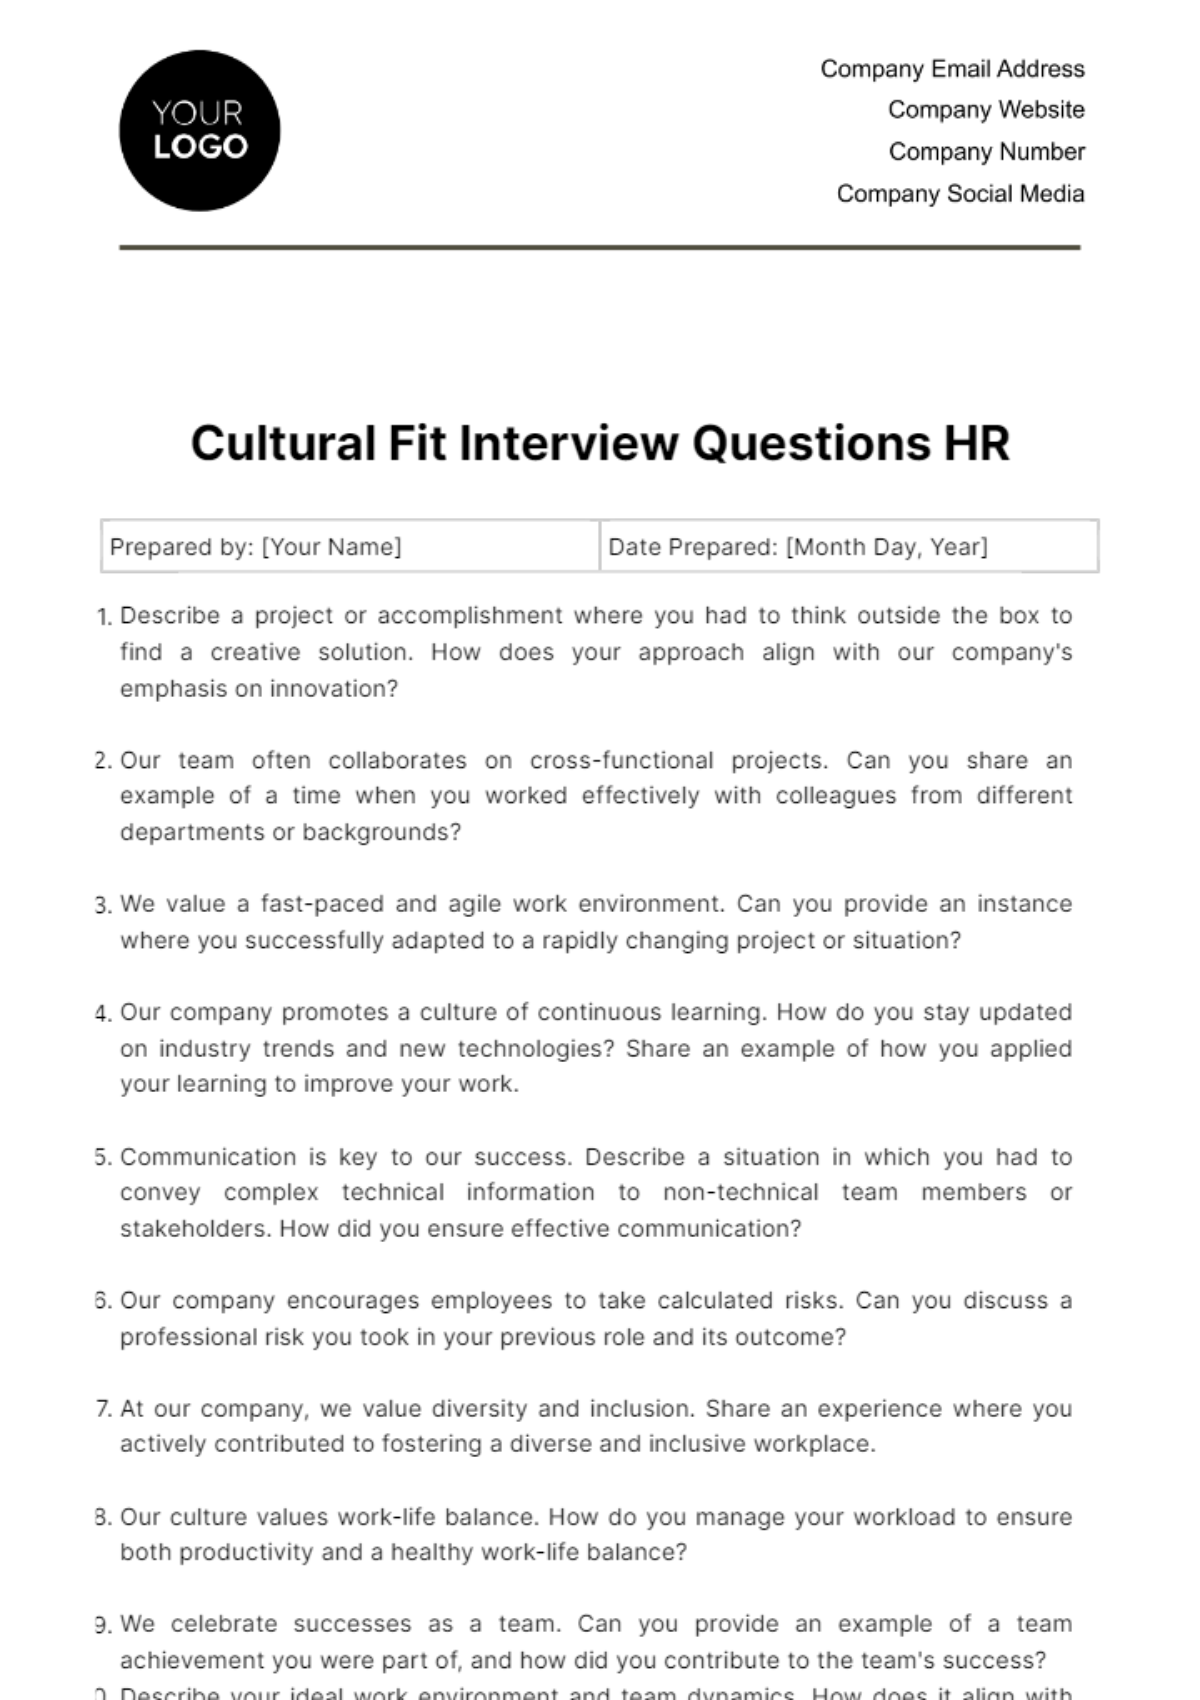 Cultural Fit Interview Questions HR Template